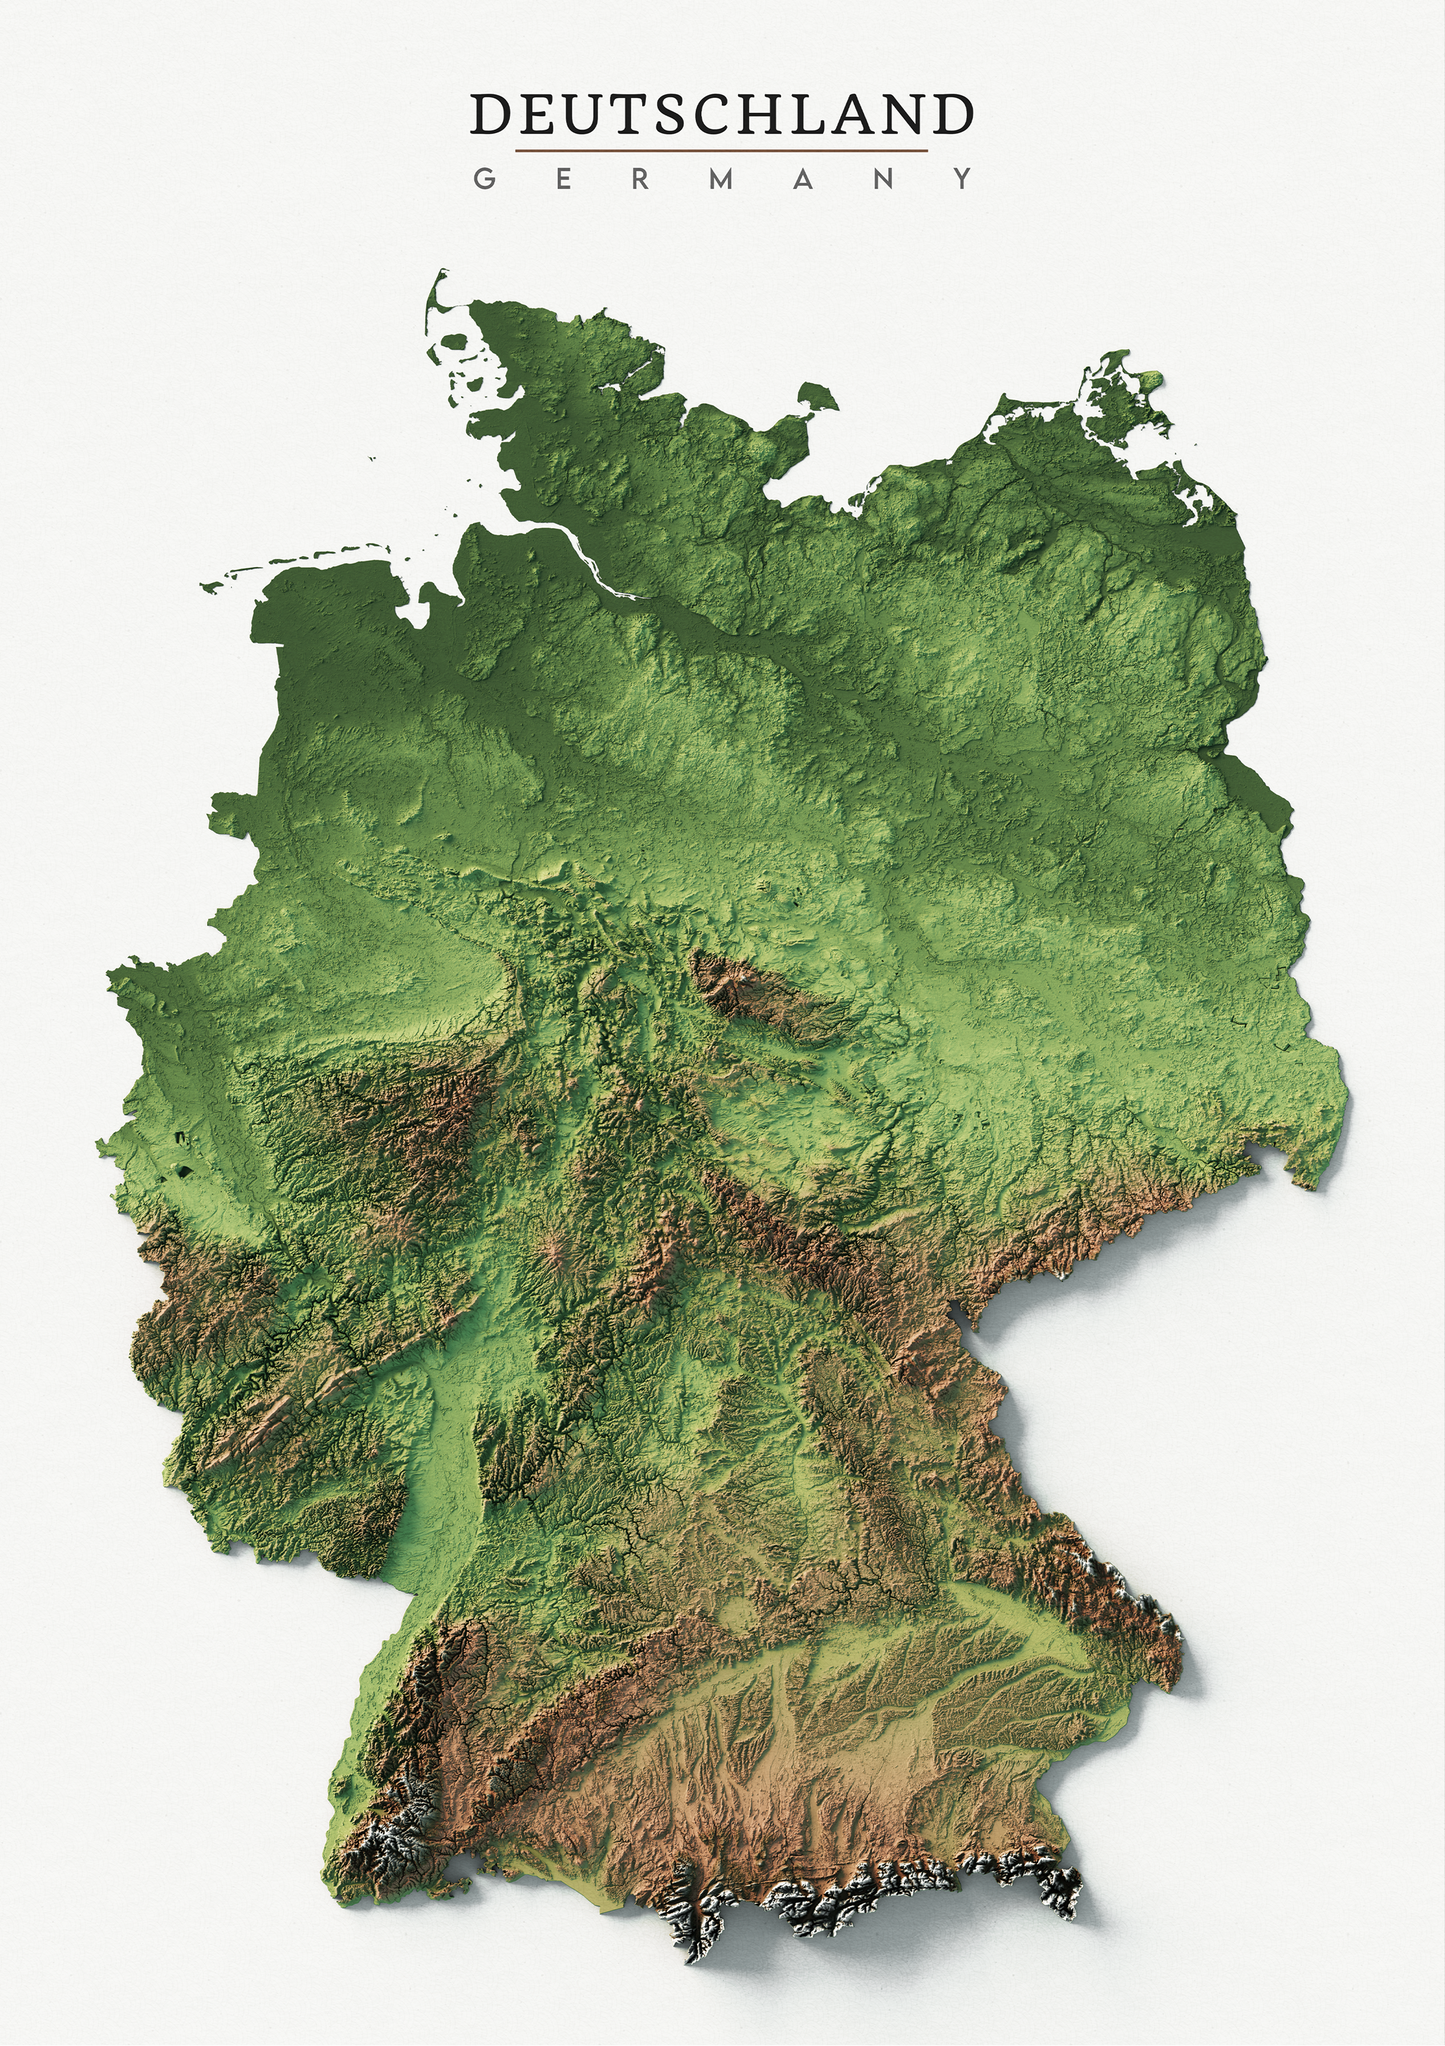 Germany Realistic Relief map